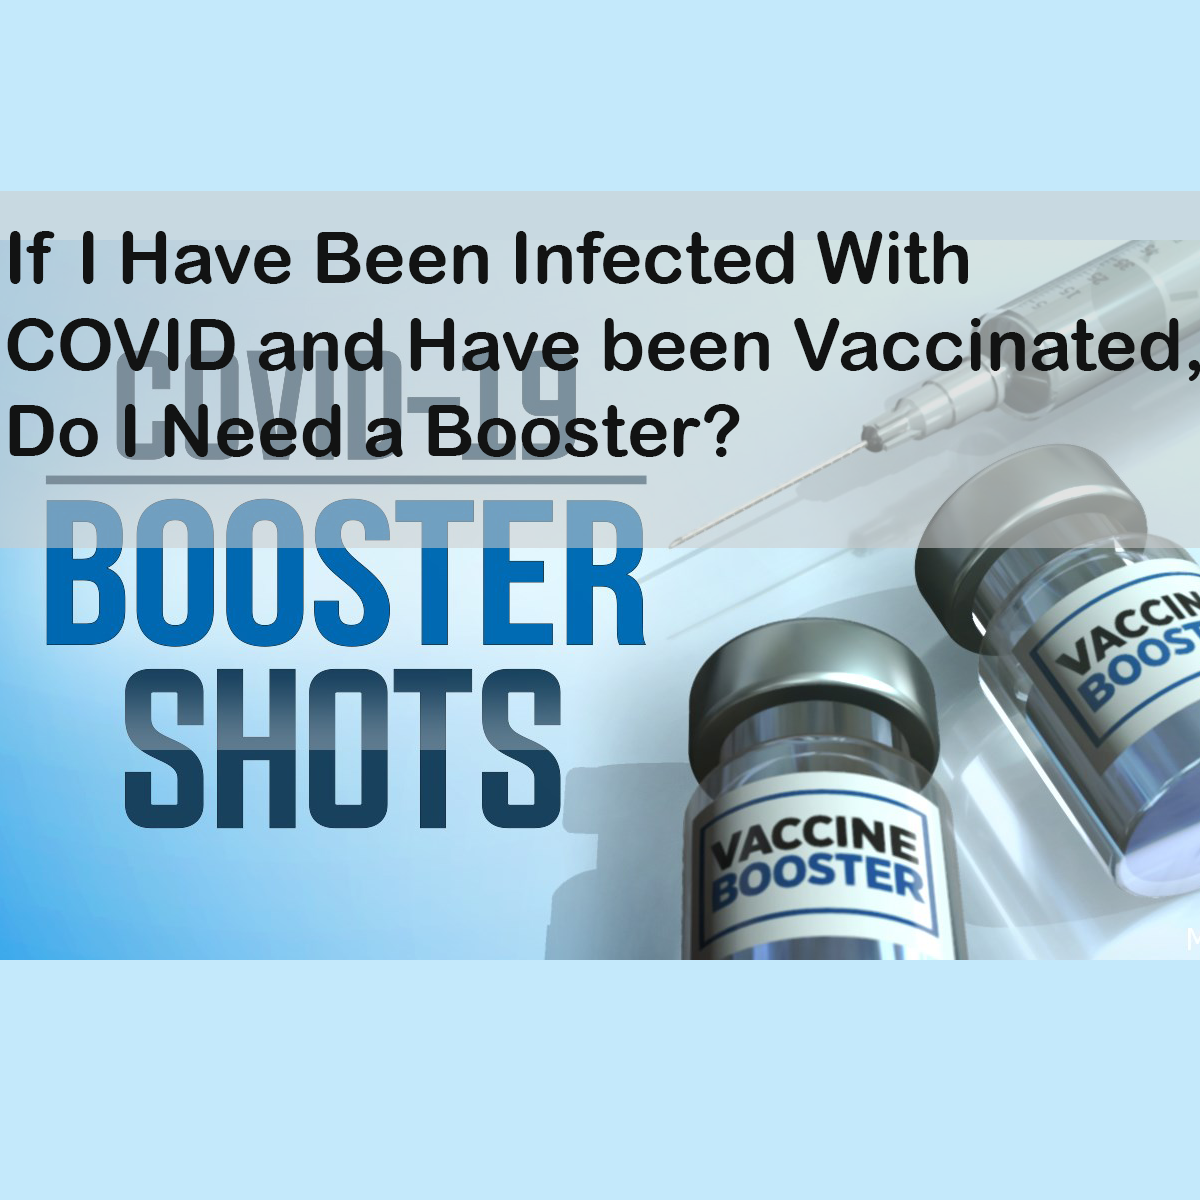 If I Have Been Infected With COVID and Have been Vaccinated, Do I Need a Booster?